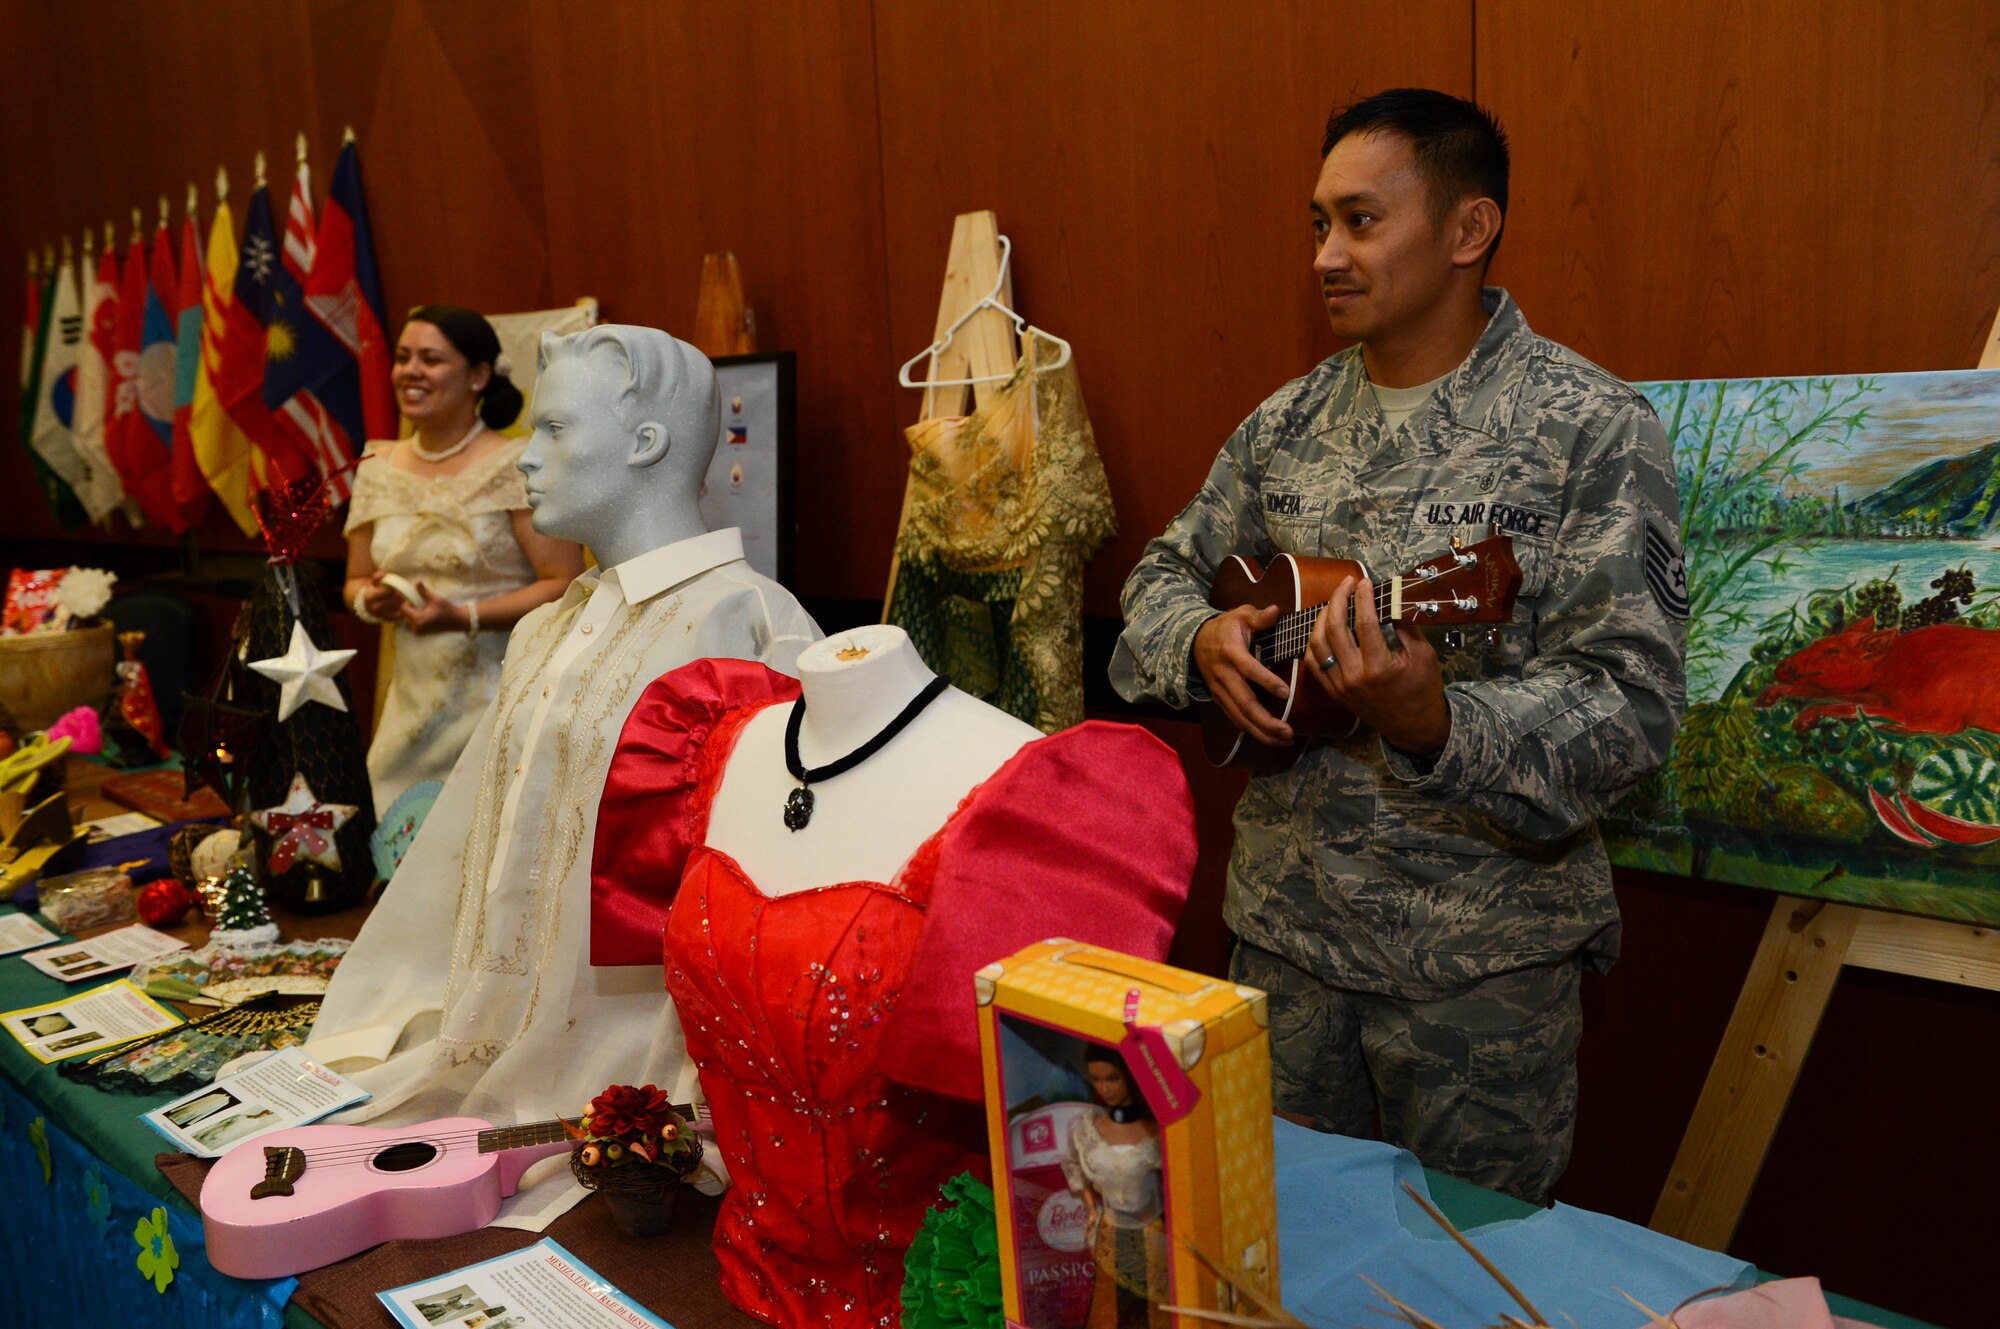 U.S. Air Force Tech. Sgt. Mark Romera, a 52nd Medical Support Squadron ultrasound technician from Daily City, Calif., plays a ukulele at a Filipino culture booth during a Diversity Day celebration at Spangdahlem Air Base, Germany, Aug. 21, 2014. Diversity Day promotes mutual respect and awareness for cultural diversity. More than 300 people attended the seventh annual Diversity Day celebration. (U.S. Air Force photo by Airman 1st Class Kyle Gese/Released)